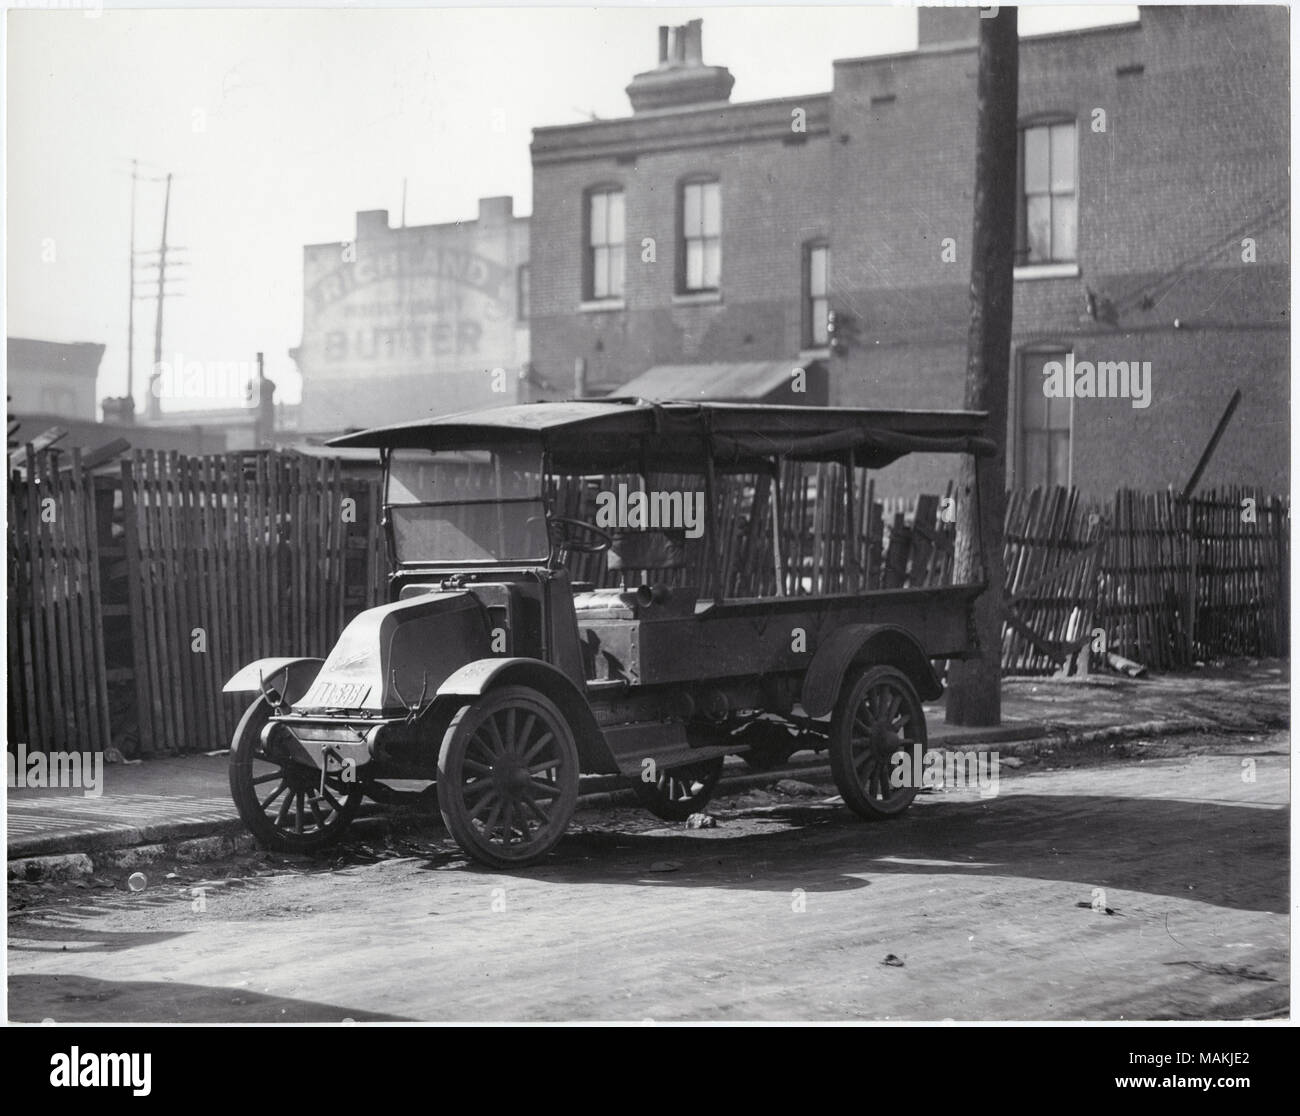 Horizontal, black and white photograph showing an open-air truck. The vehicle has an open cargo area behind the driver's seat. Although the body of the vehicle is open, a roof covers both the driver's seat and the cargo area. Rolled-up side curtains are visible along the roof line, and a hand-crank can be seen at the front of the vehicle. A wooden fence and several unidentified buildings, one with a large advertisement for Richland butter, are in the background. Title: Open-air truck, unidentified location.  . circa 1915. Holt, Charles Clement, 1866-1925 Stock Photo